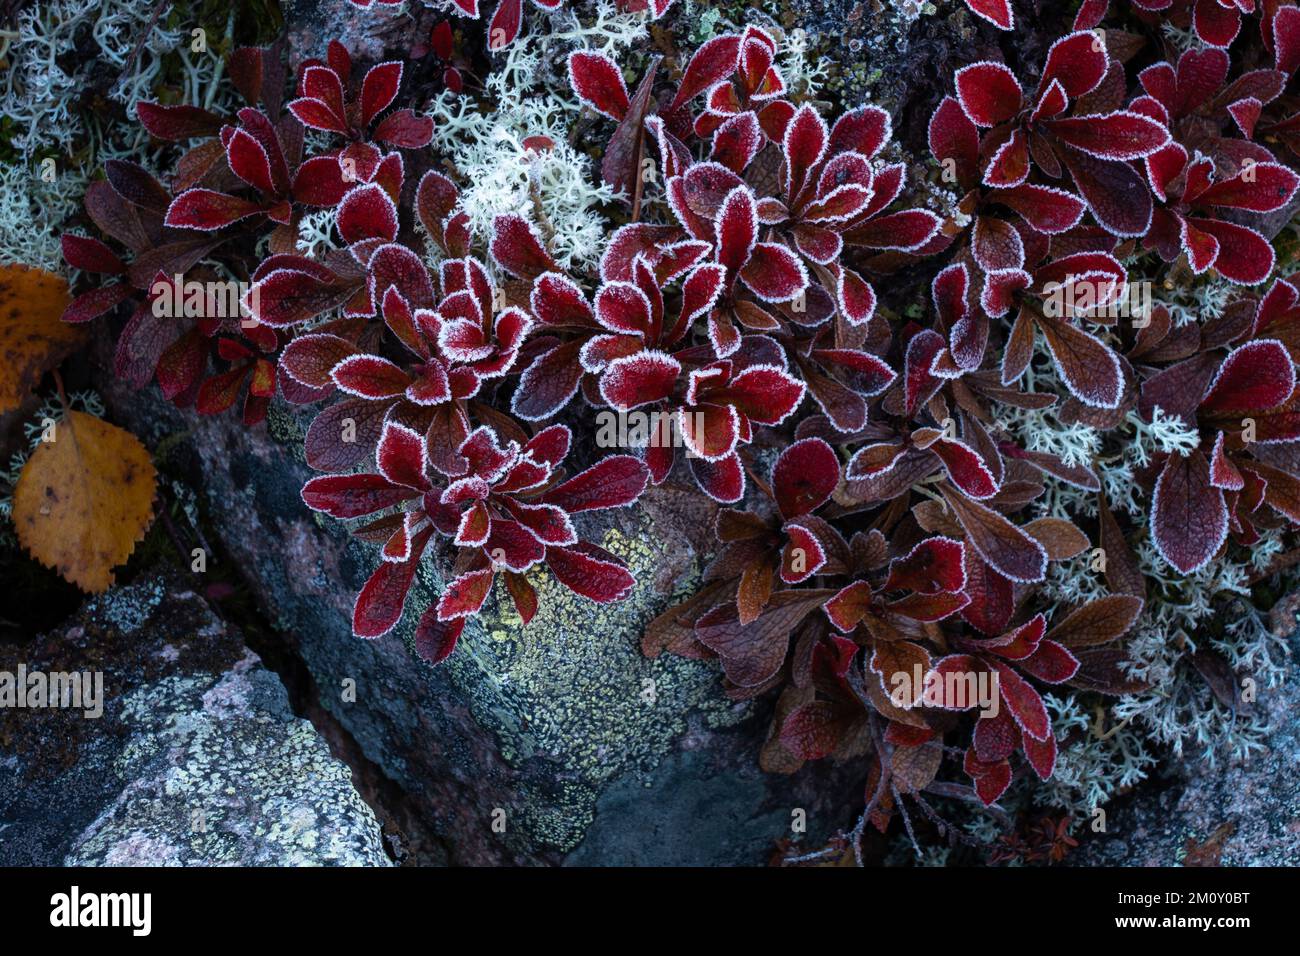 Frosty vibrant red Alpine bearberry, Arctous alpina growing on a rock during autumn foliage in Salla National Park, Northern Finland Stock Photo